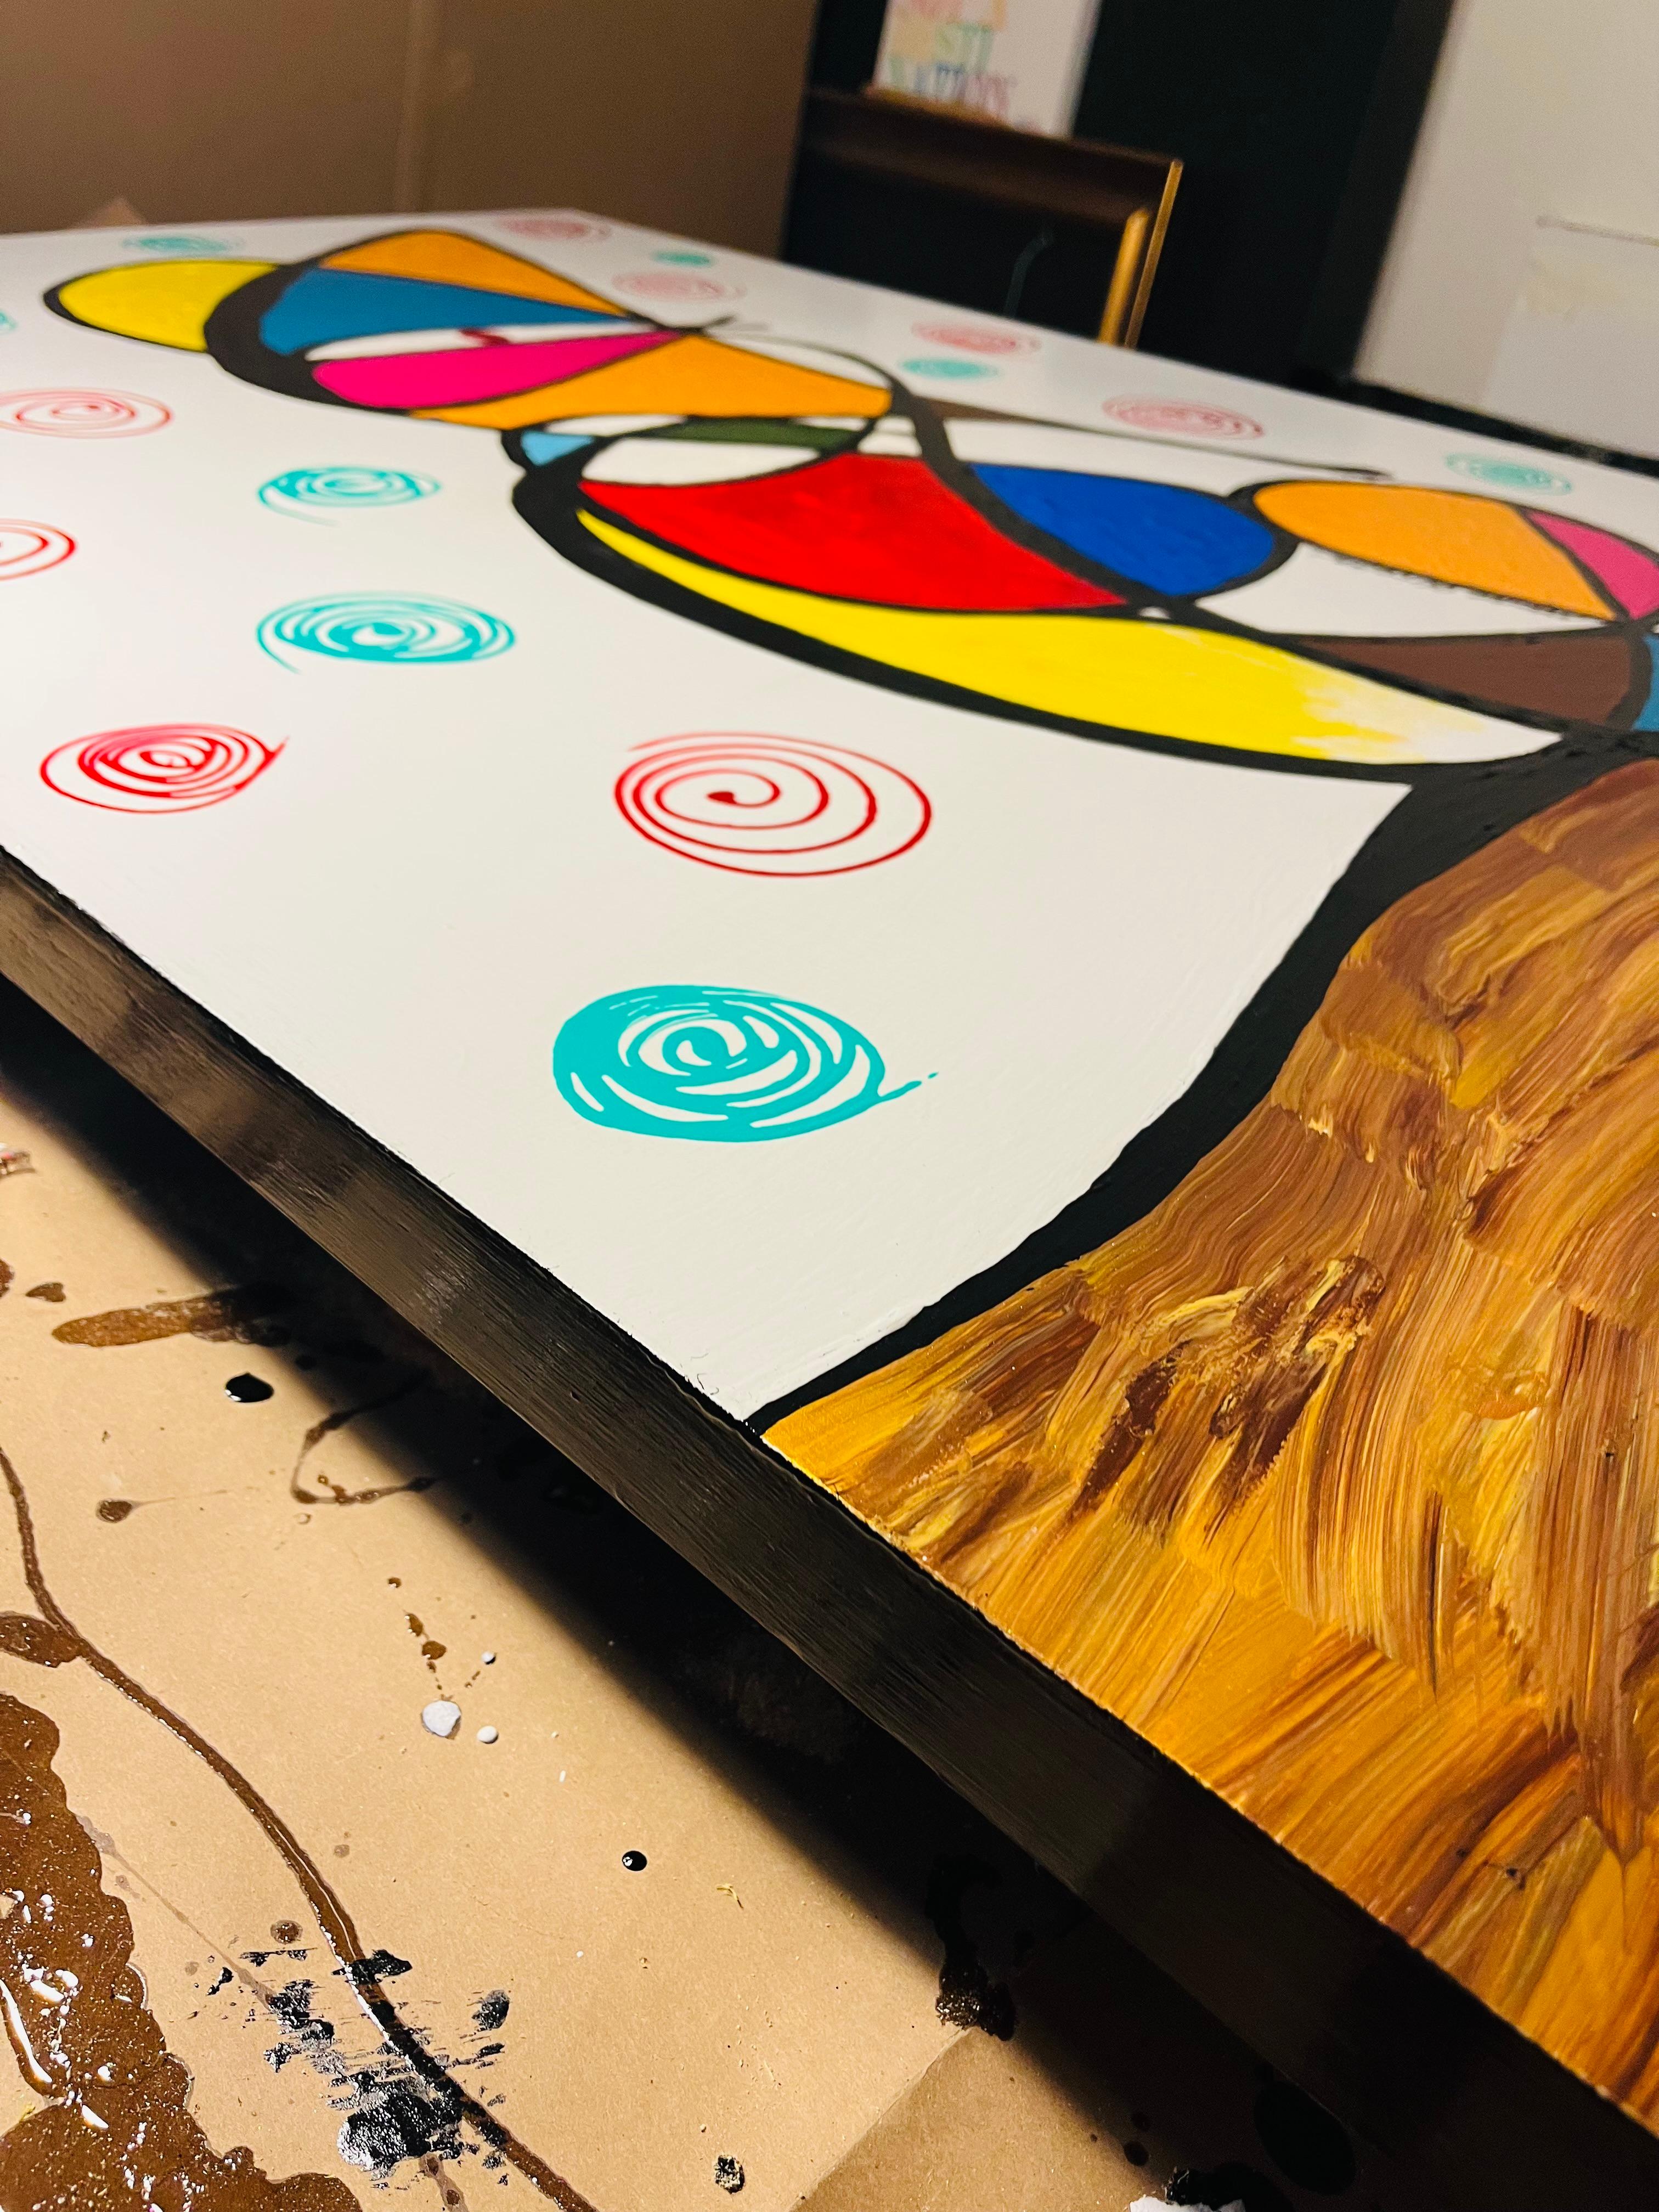 **LIMITED TIME SUPER SALE UNTIL MAY 31 - TAKE ADVANTAGE OF IT**

Ratatouille by Mauro Oliveira, signed. Abstract painting / acrylic paint on wood panel with a glossy varnish. Design comes from pure inspiration when the artist closes his eyes.

A